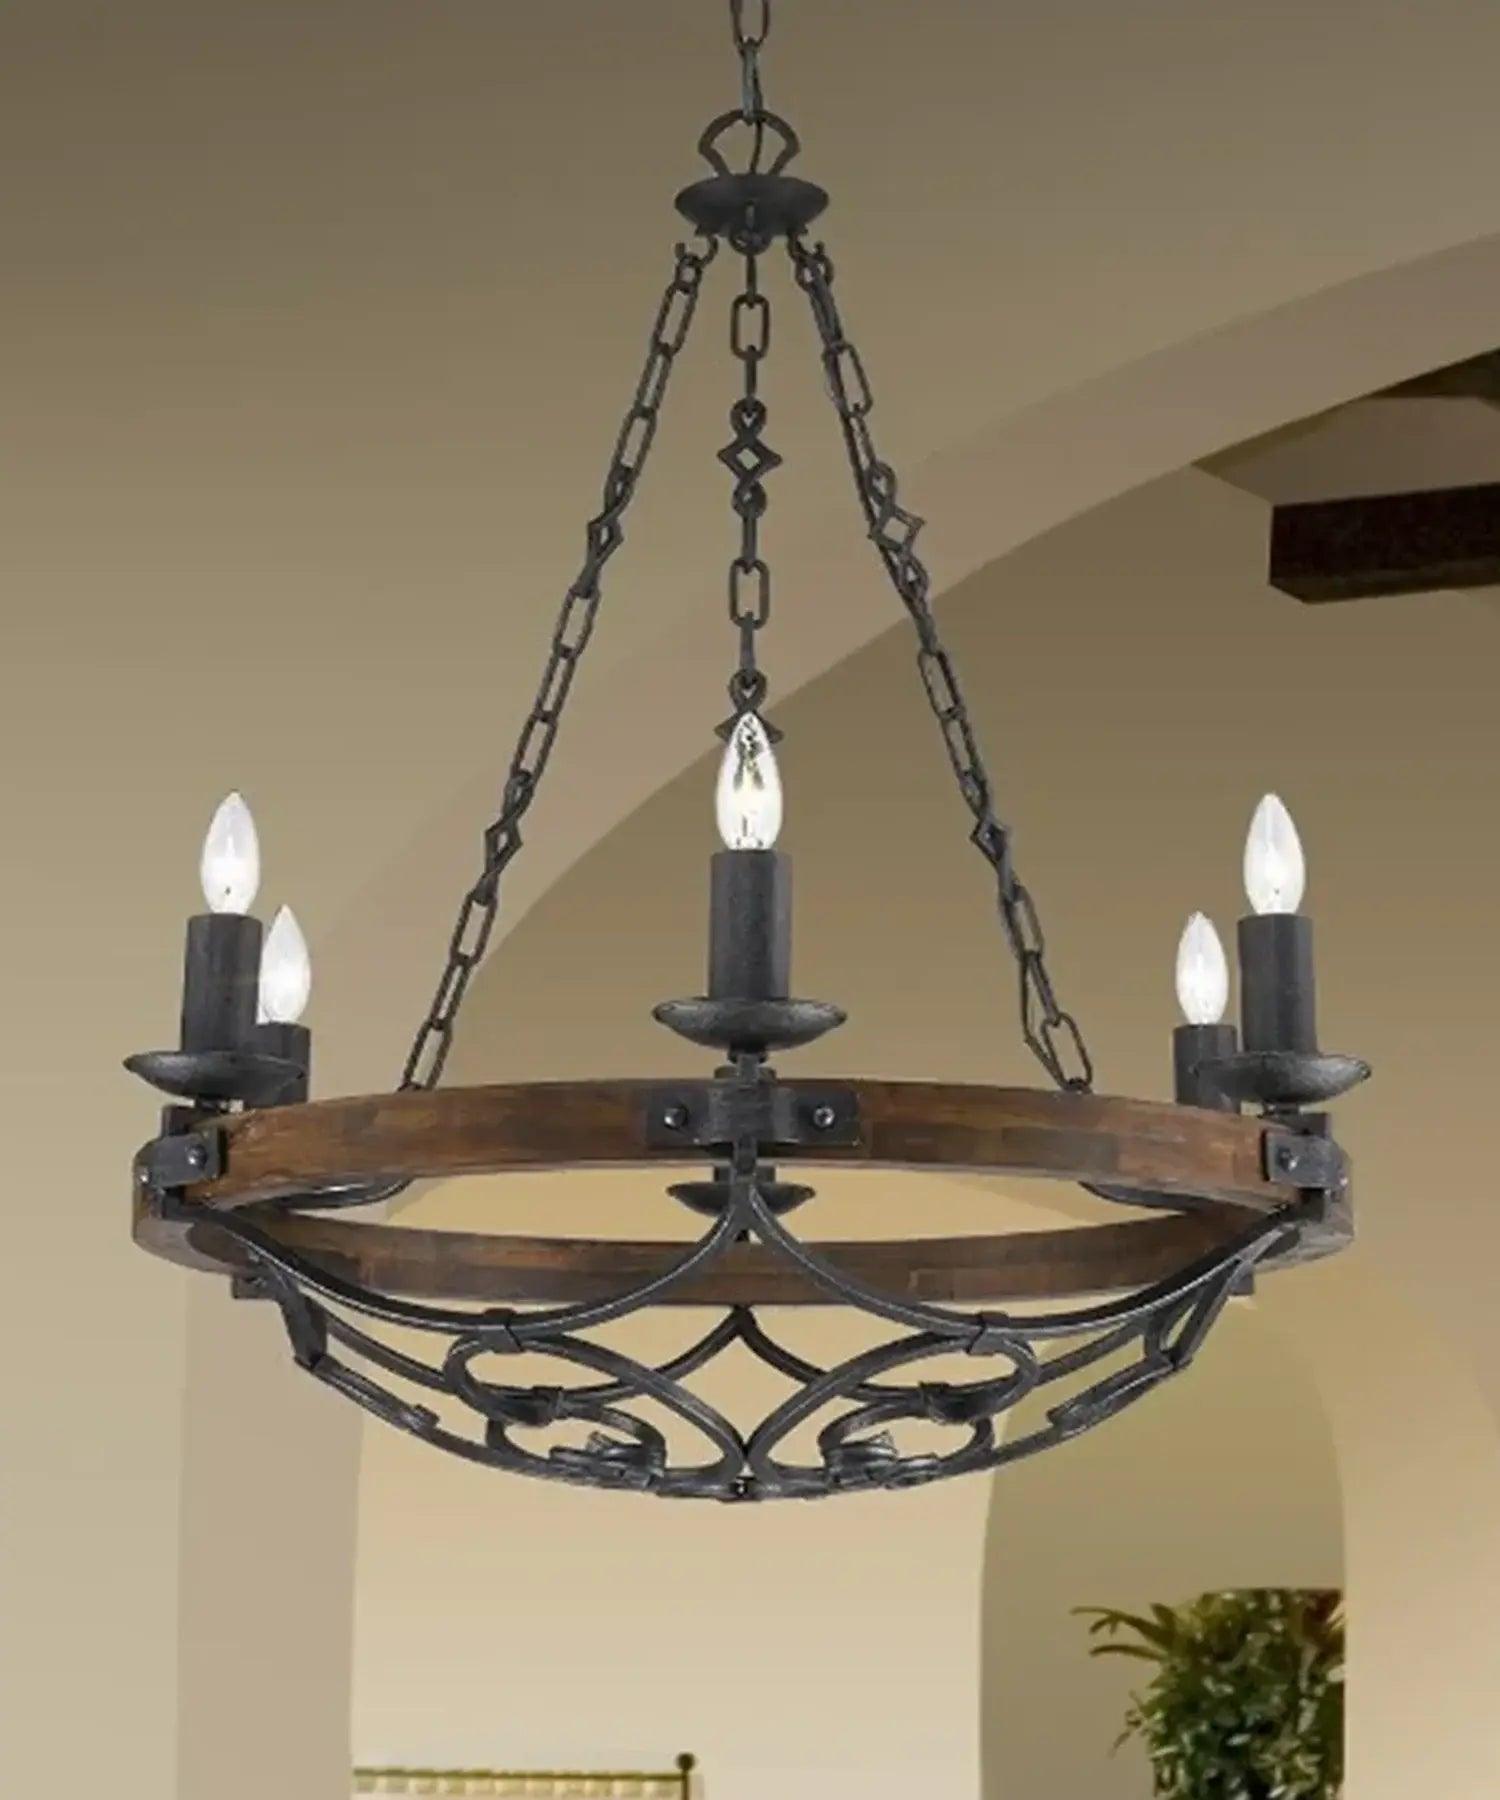 Rustic Farmhouse Chandeliers - Bees Lighting